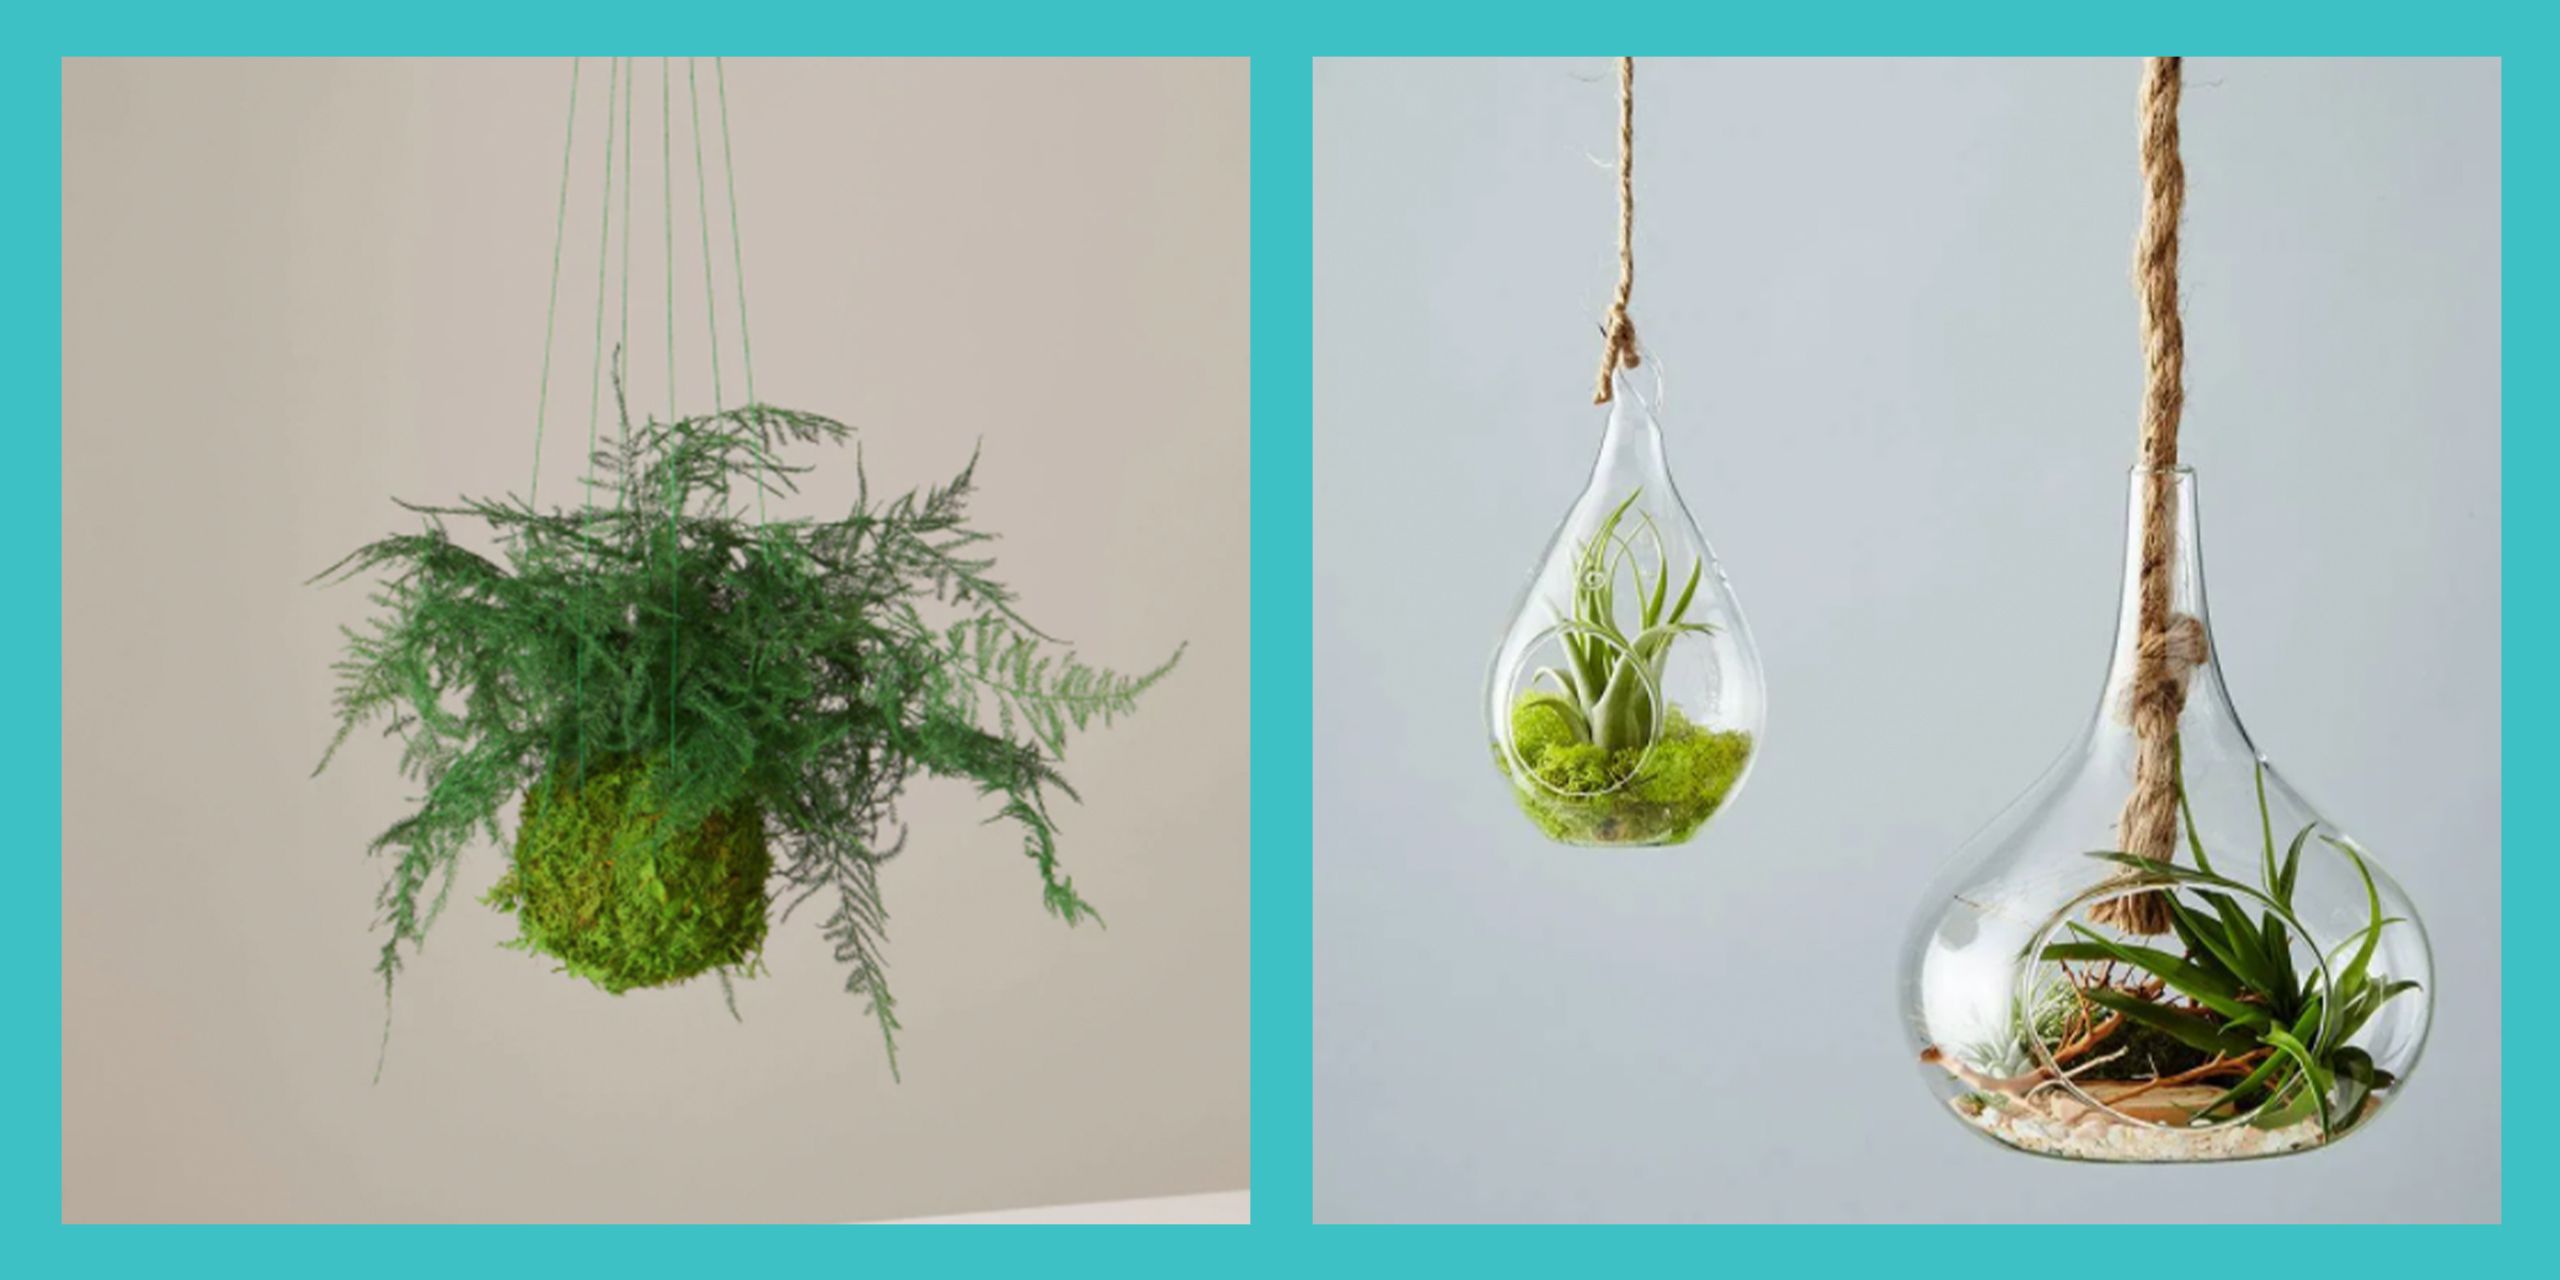 Hanging Plants Need More Than Water. Try These Saucer Solutions